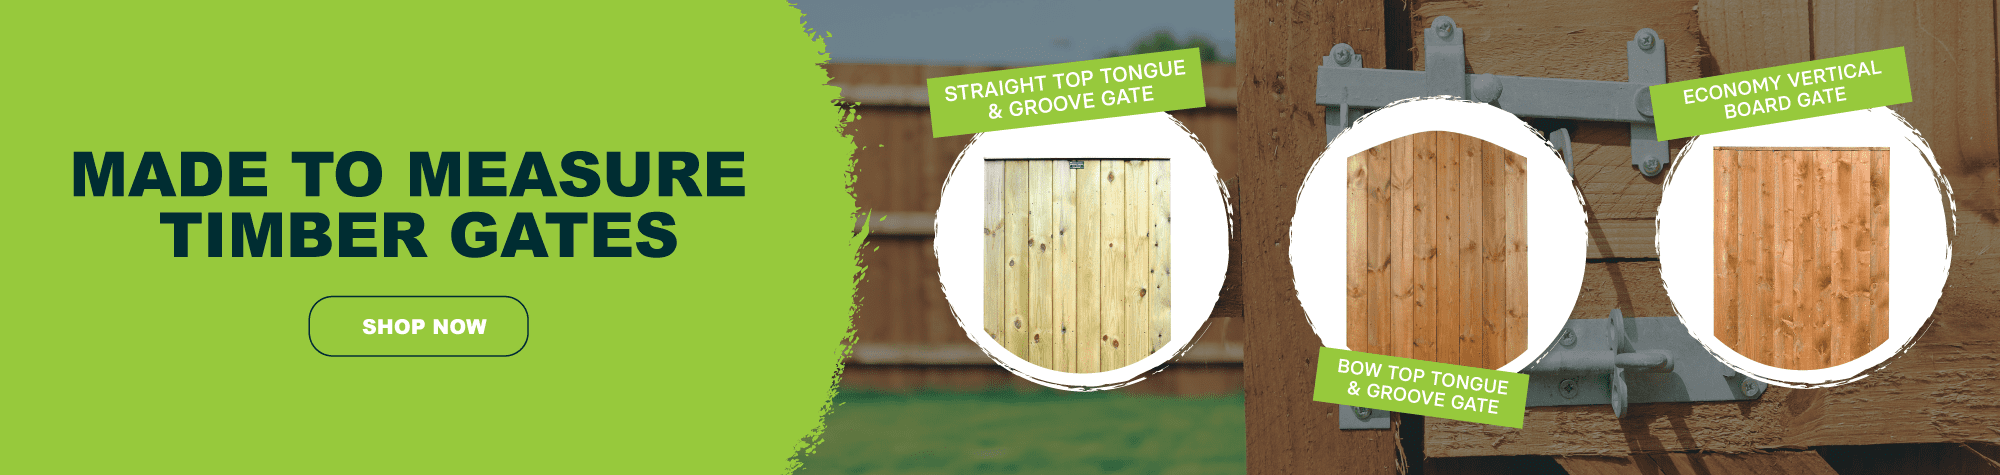 Made To Measure Timber Gates